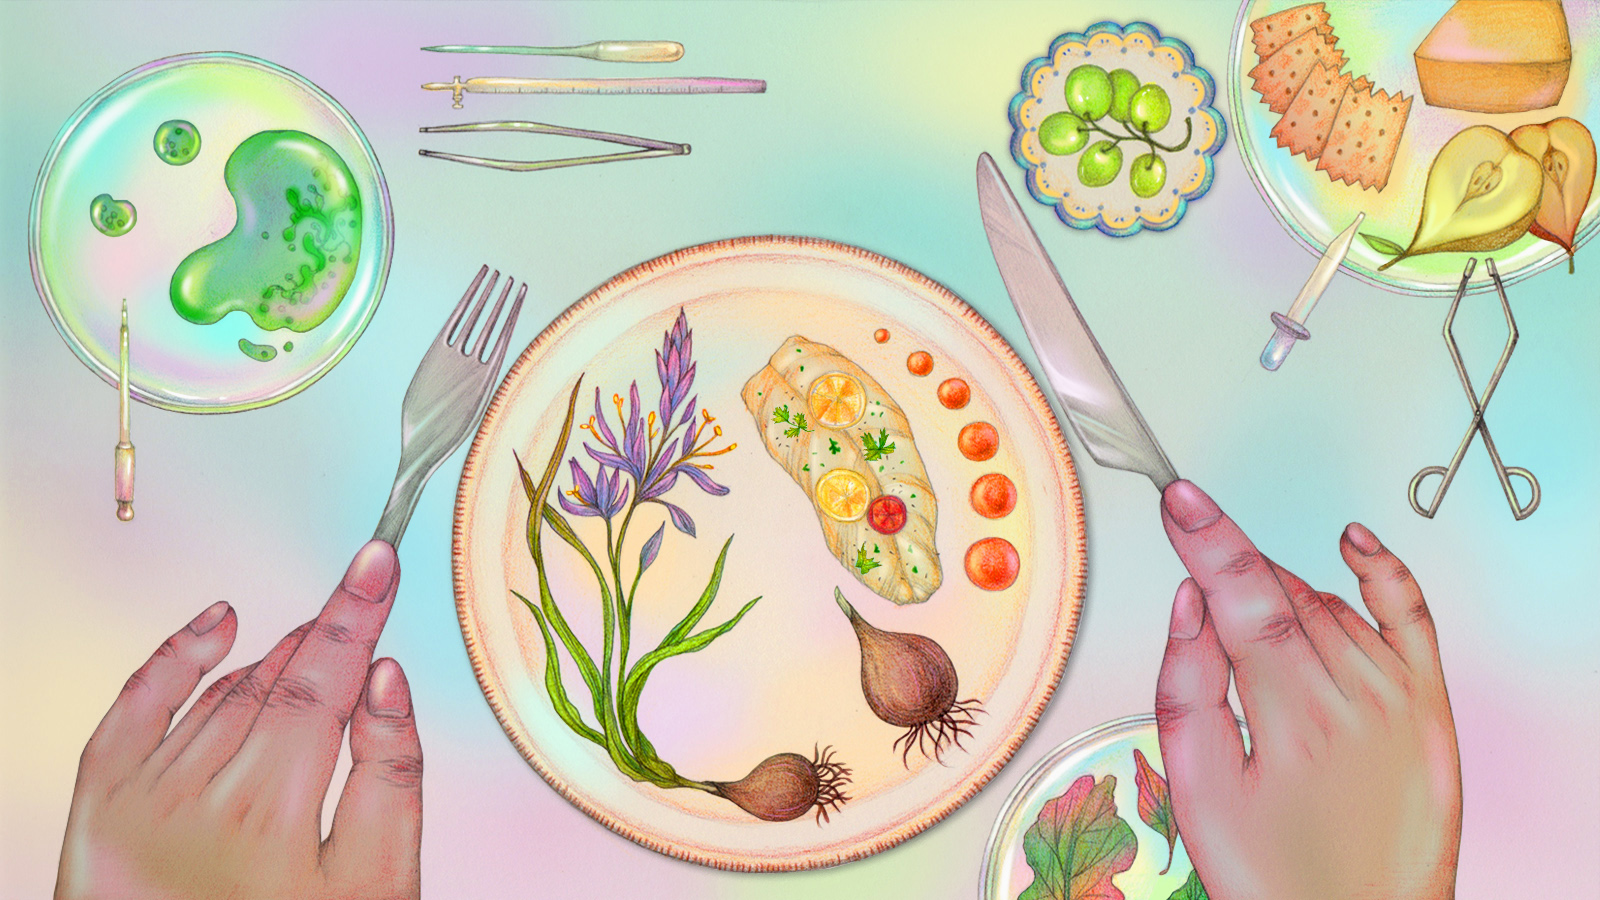 Illustration of dinner spread featuring roasted camas, fish, grapes, cheese, algae, with some food served in Petri dishes